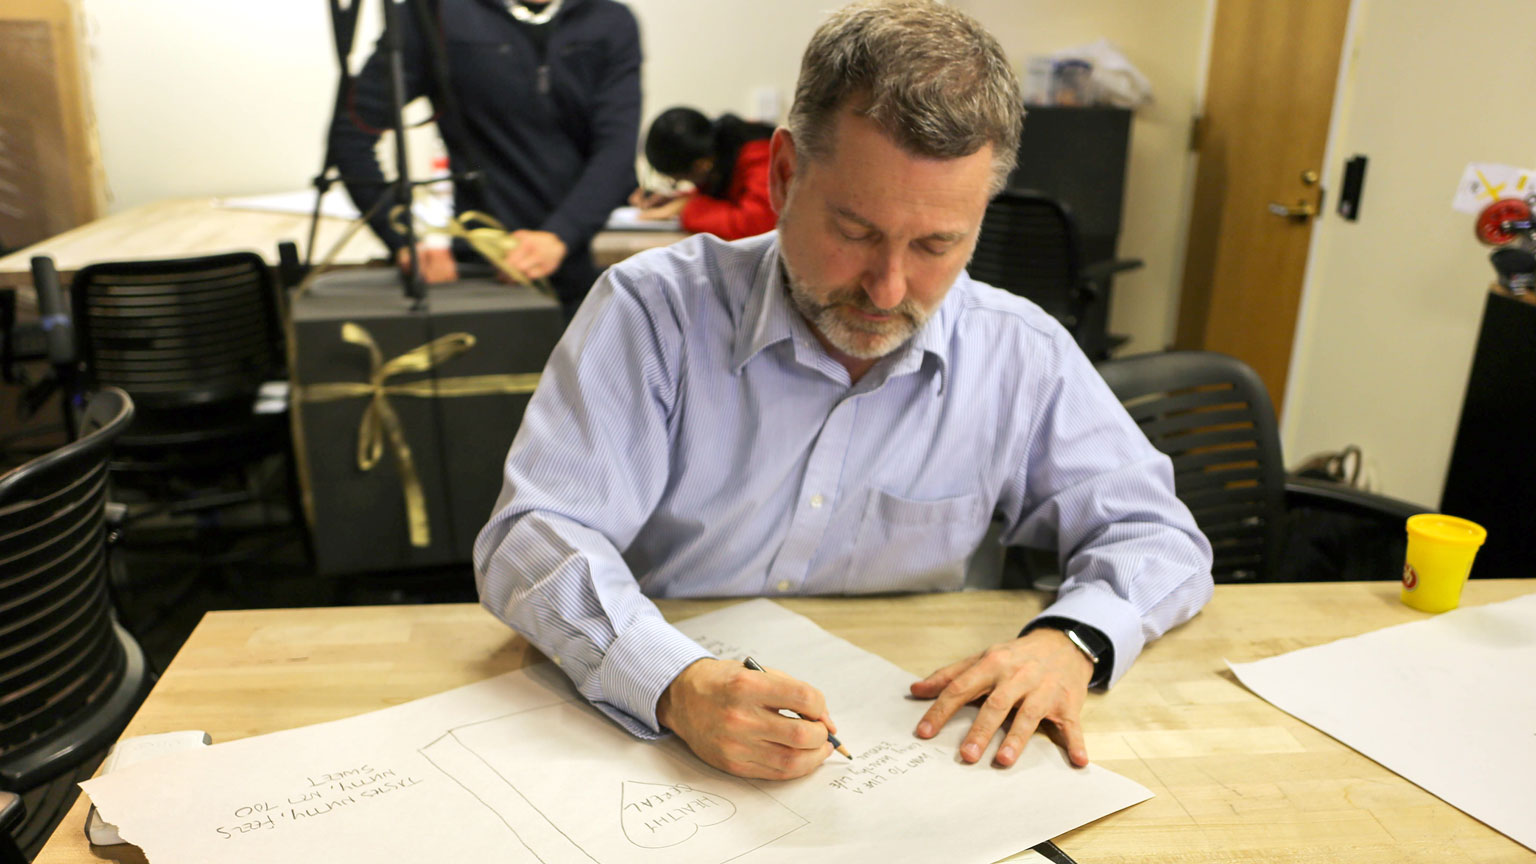 A man sketches in a large notebook while a cameraman films from behind, photo taken during a Design Bloc activity on narrative storytelling. 